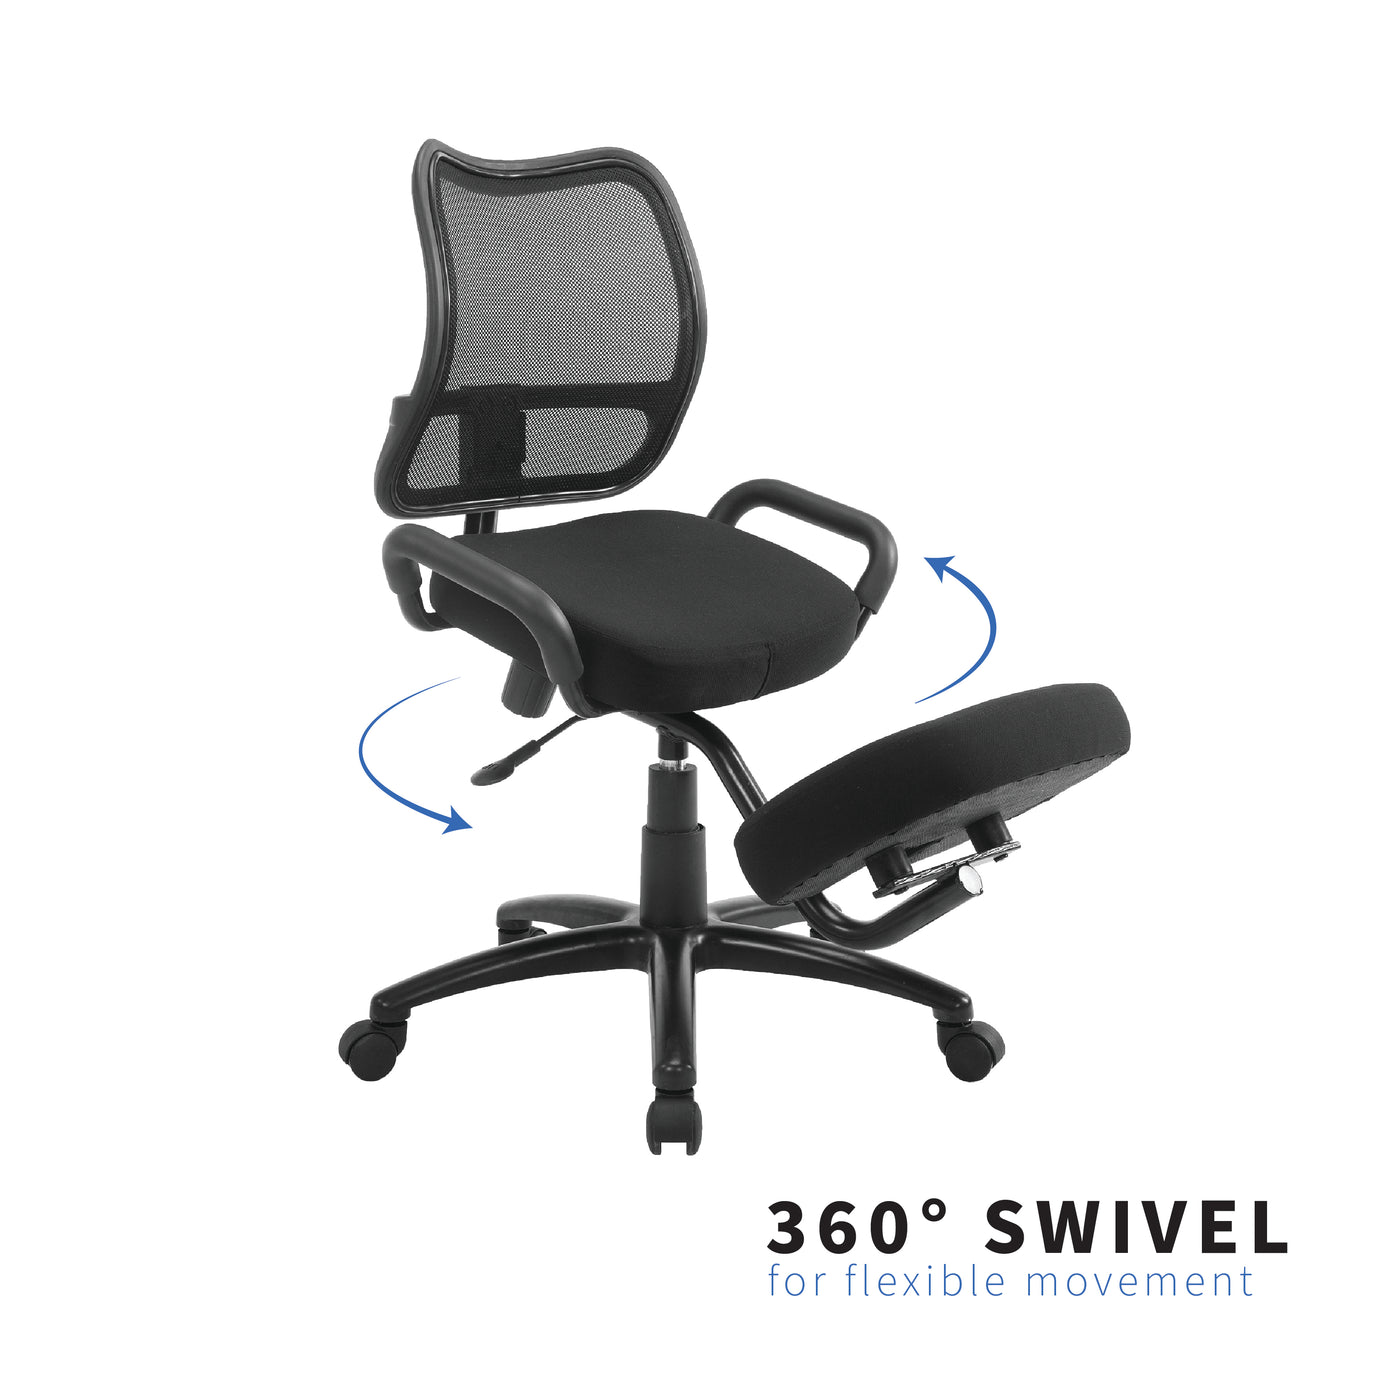 Comfortable black swivel kneeling chair with wheels for easy flexible movement.